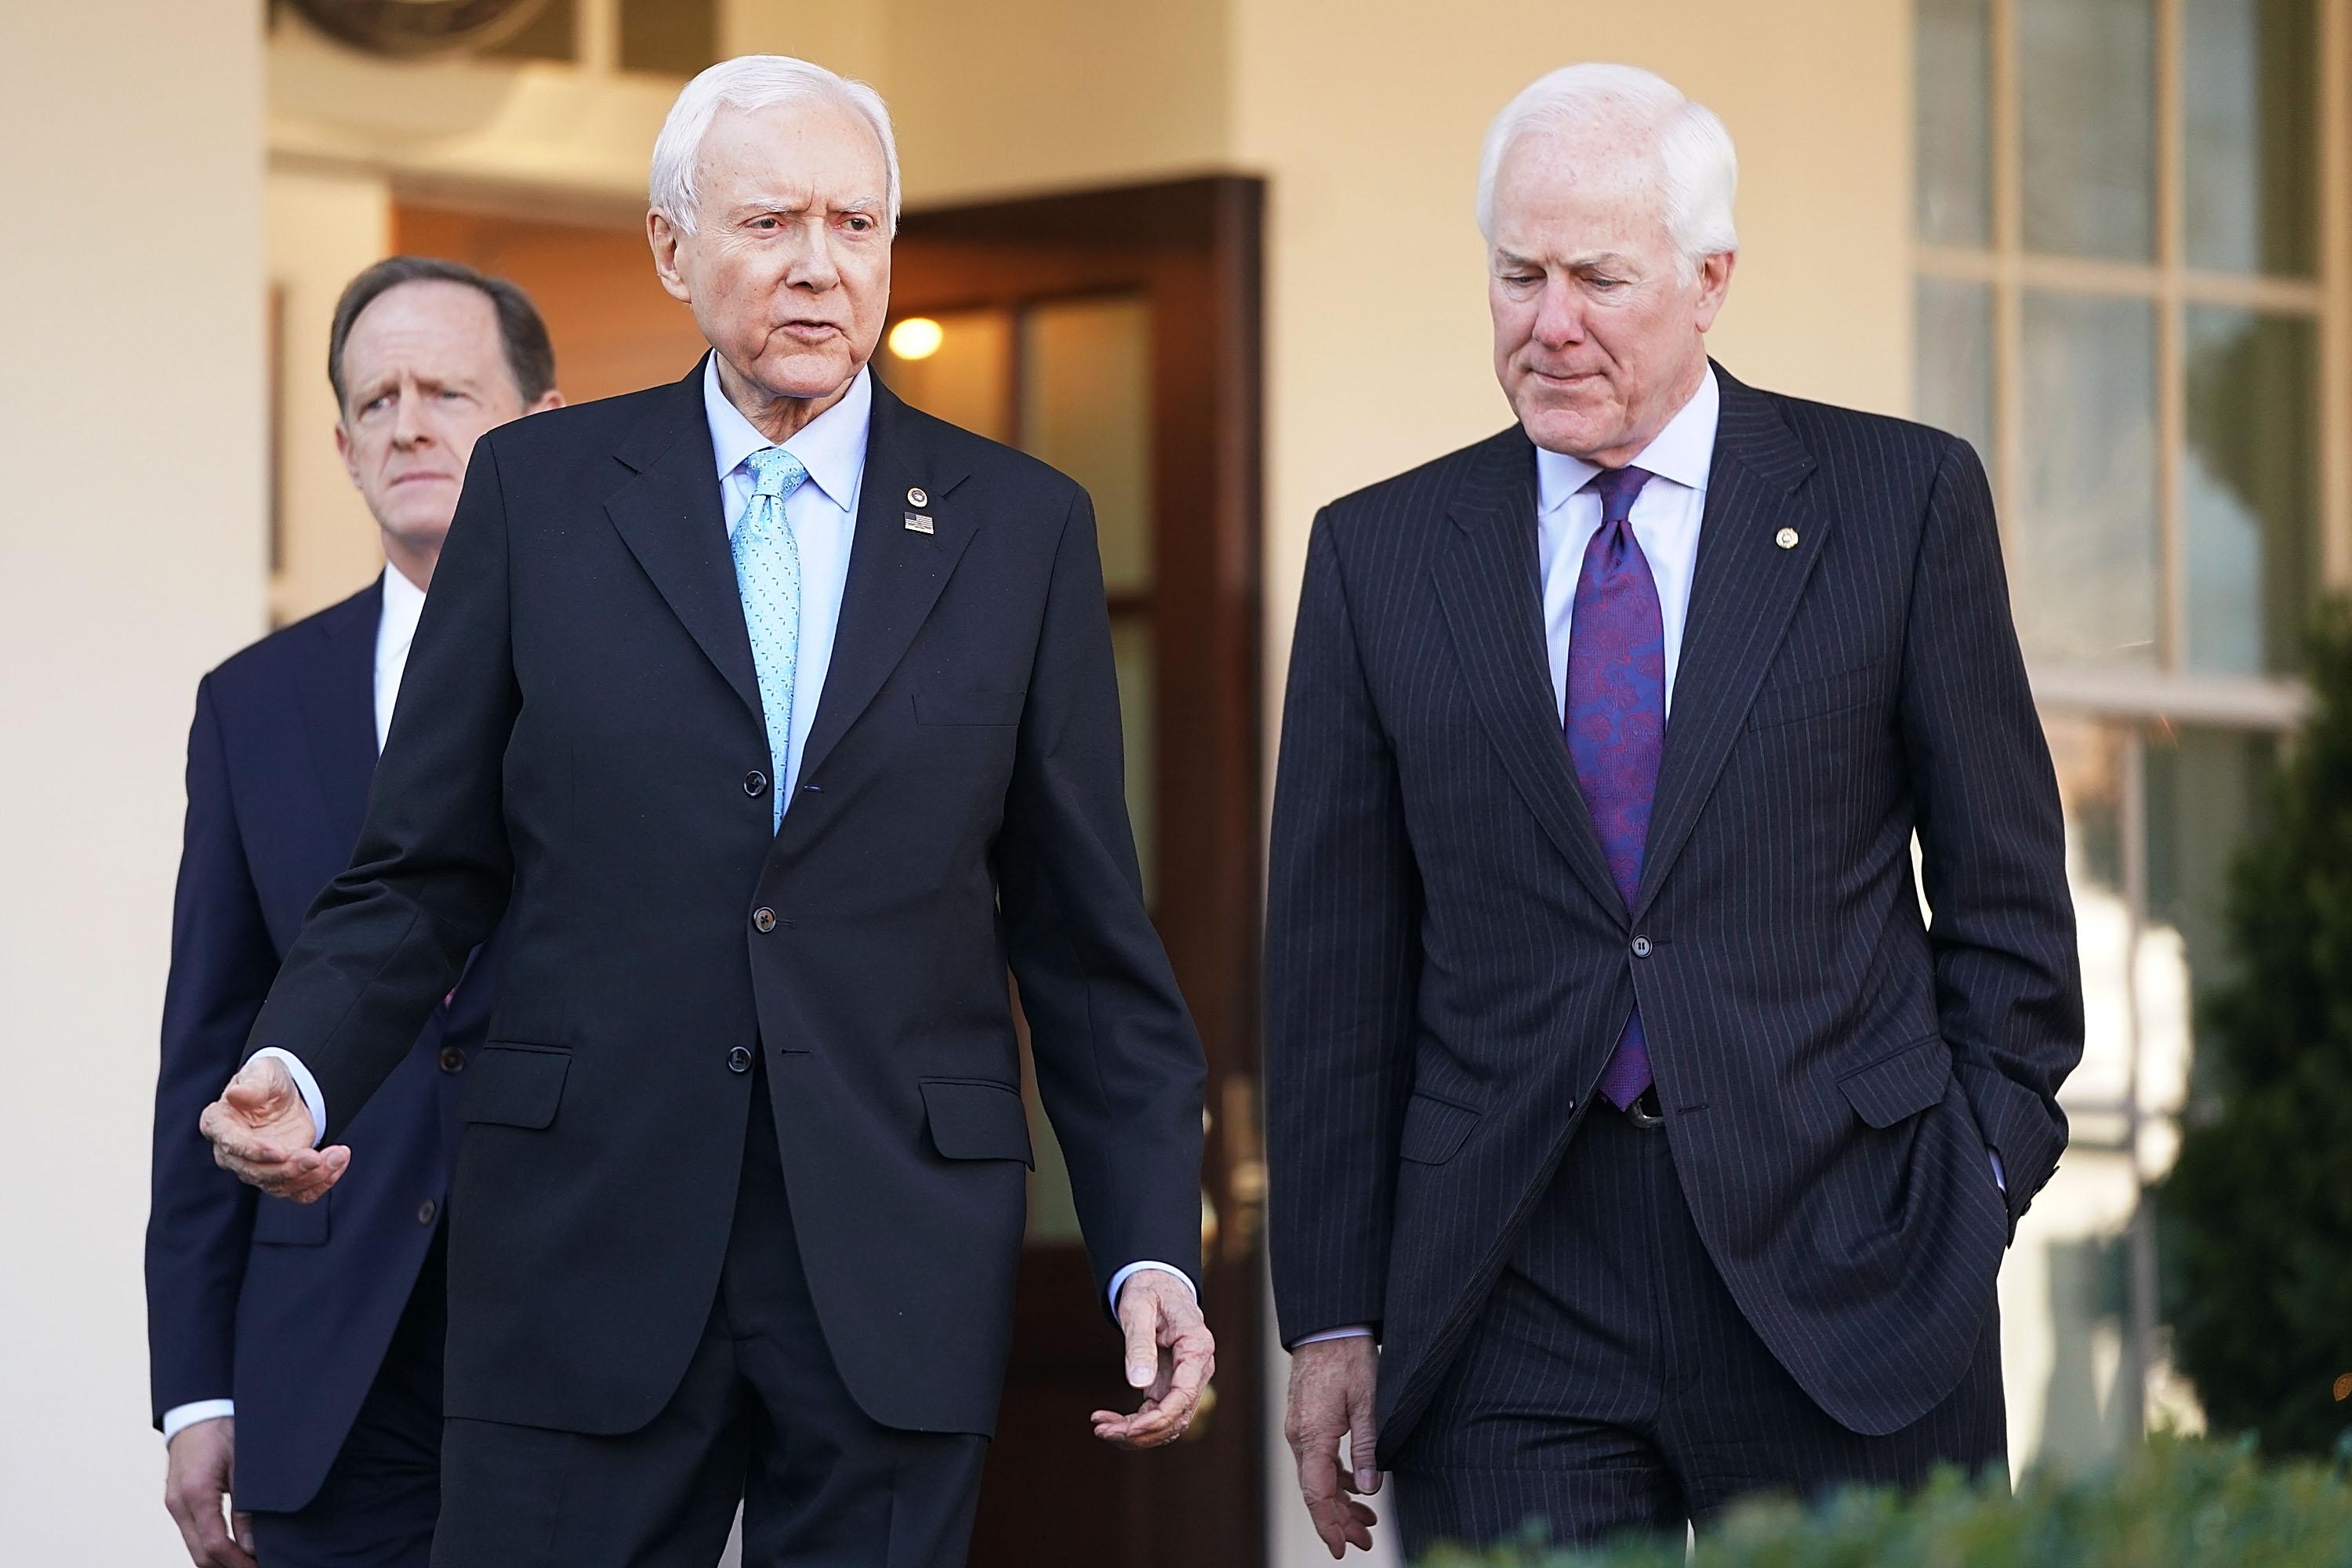 WASHINGTON, DC - NOVEMBER 27:  Senate Finance Committee members Sen. Pat Toomey (R-PA) (L) and Sen. John Cornyn (R-TX) (R) walk out of the West Wing with Chairman Orrin Hatch (R-UT) following a lunch meeting with U.S. President Donald Trump at the White House November 27, 2017 in Washington, DC. Senate Republicans hope to pass tax reform and tax cut legislation this week and move closer to Trump's goal of signing it before the end of the year.  (Photo by Chip Somodevilla/Getty Images)